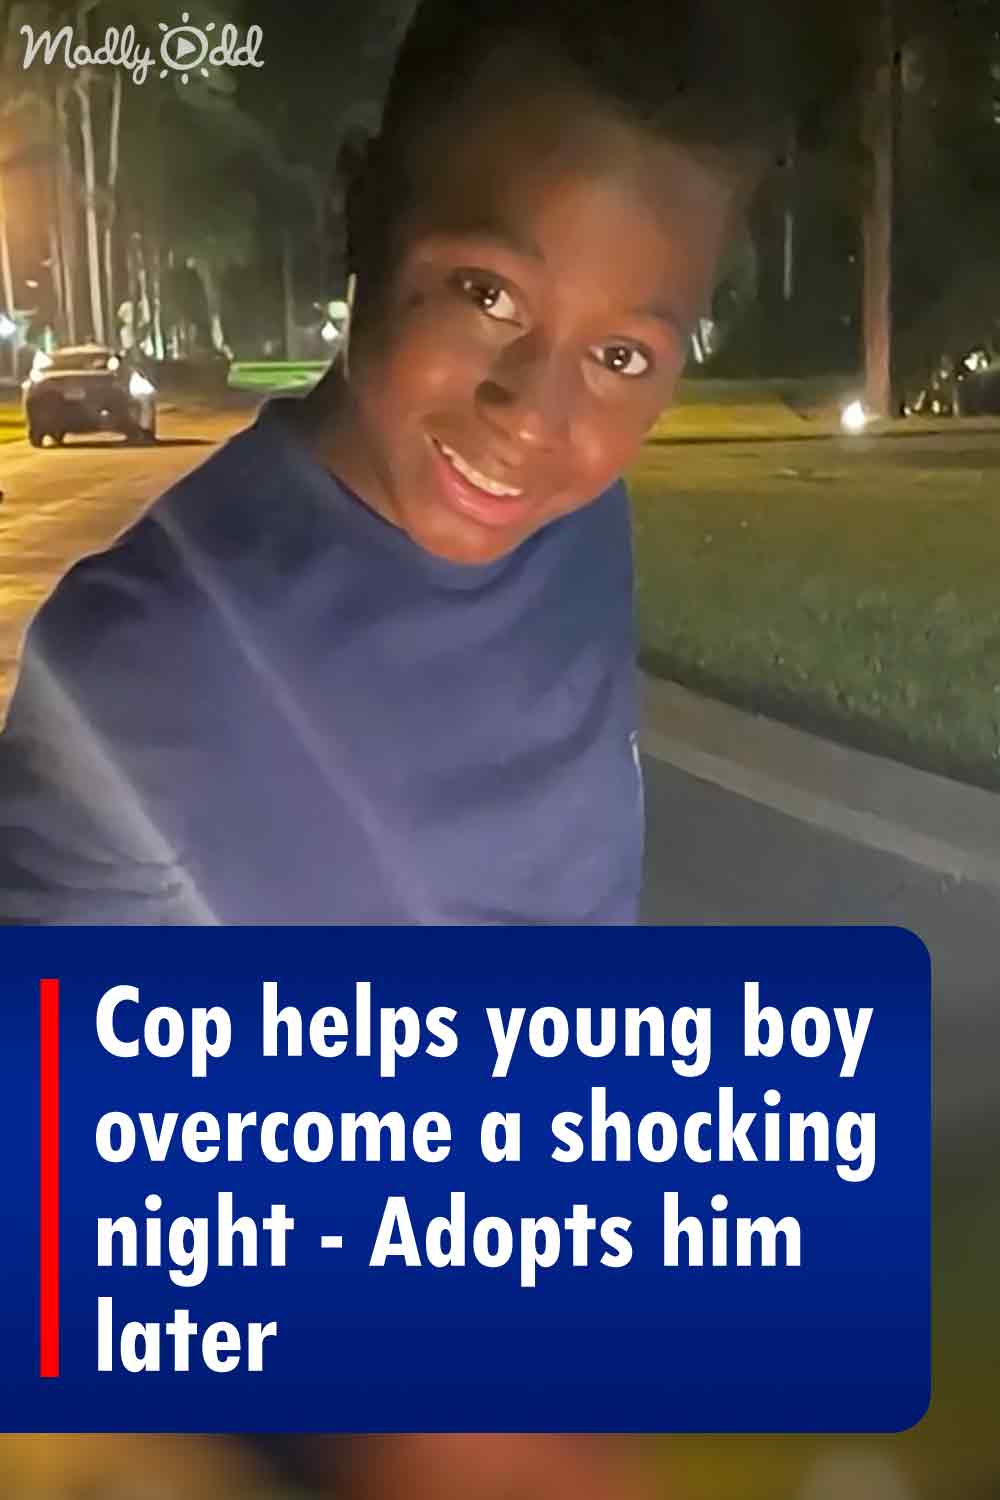 Cop helps young boy overcome a shocking night - Adopts him later